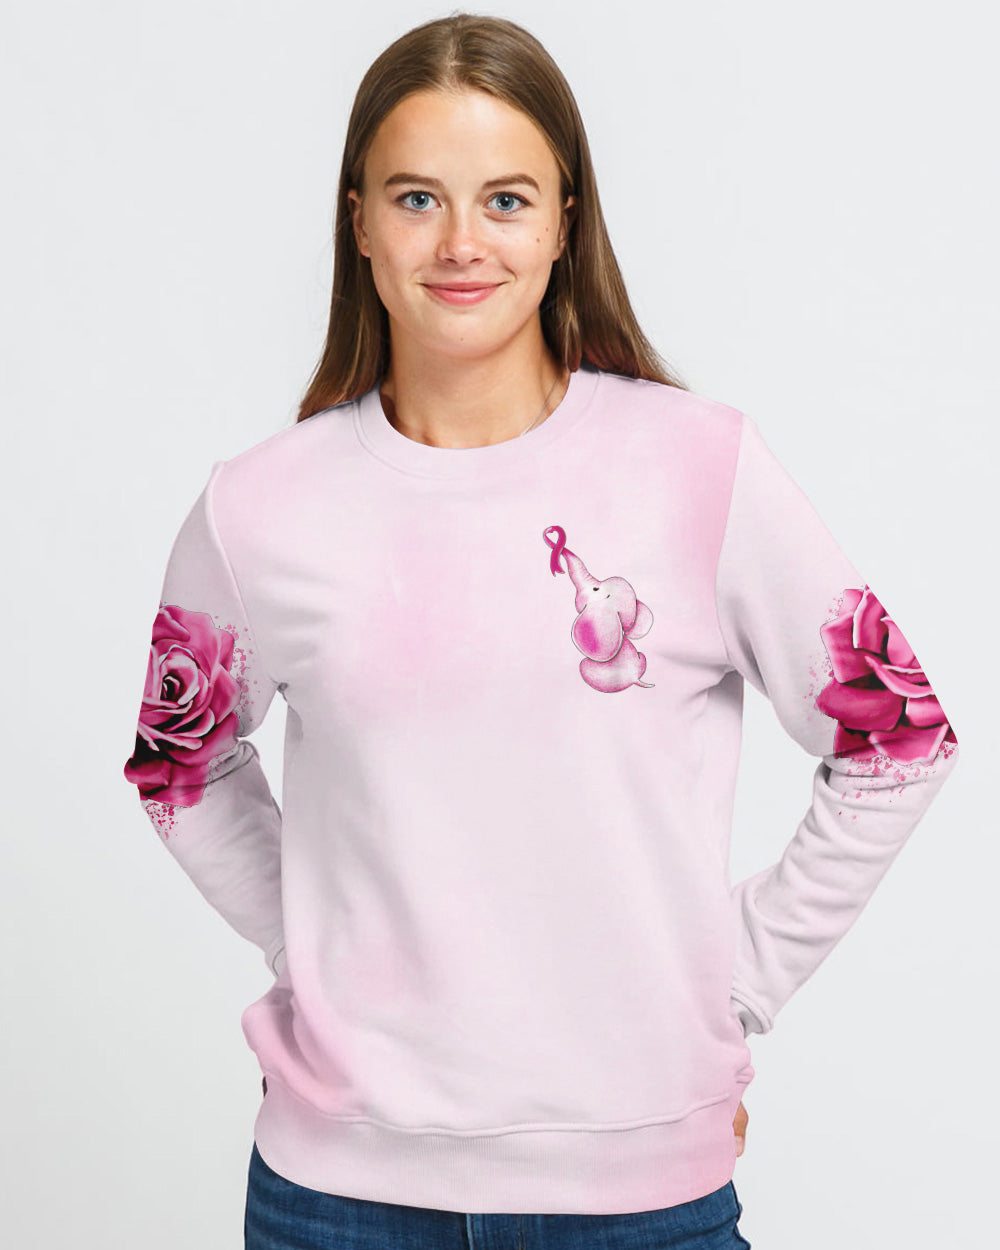 Never Give Up Rose Elephant Women's Breast Cancer Awareness Sweatshirt